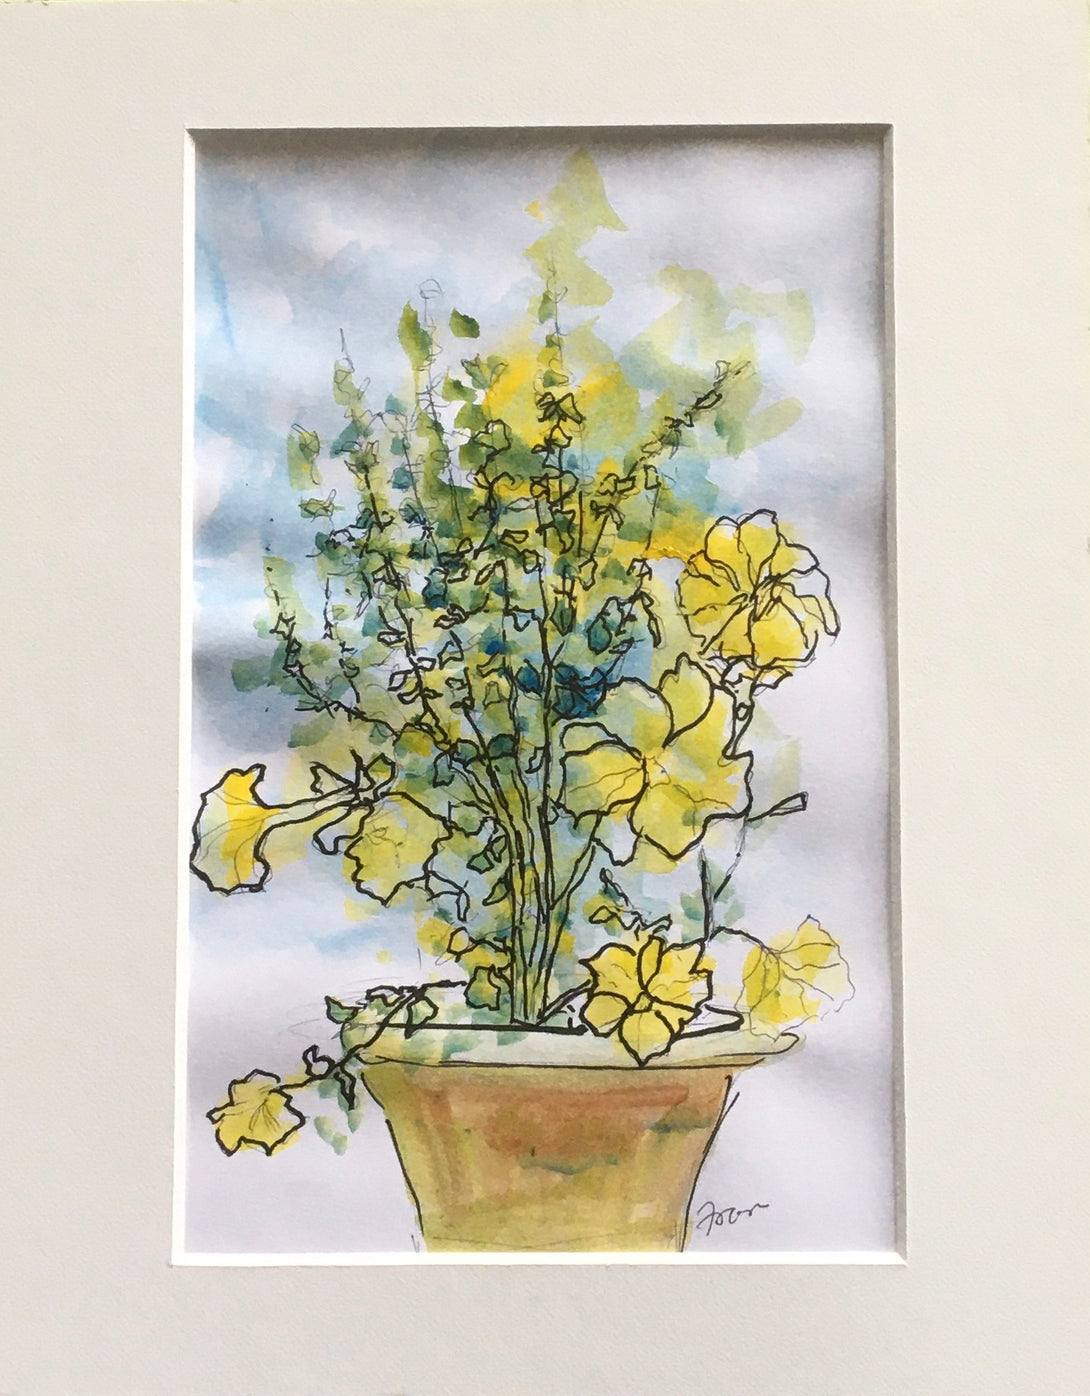 Fran Renwick - Watercolour painting - Potted plant, matted, unframed - Fran Renwick - McMillan Arts Centre Gallery, Gift Shop and Box Office - Vancouver Island Art Gallery